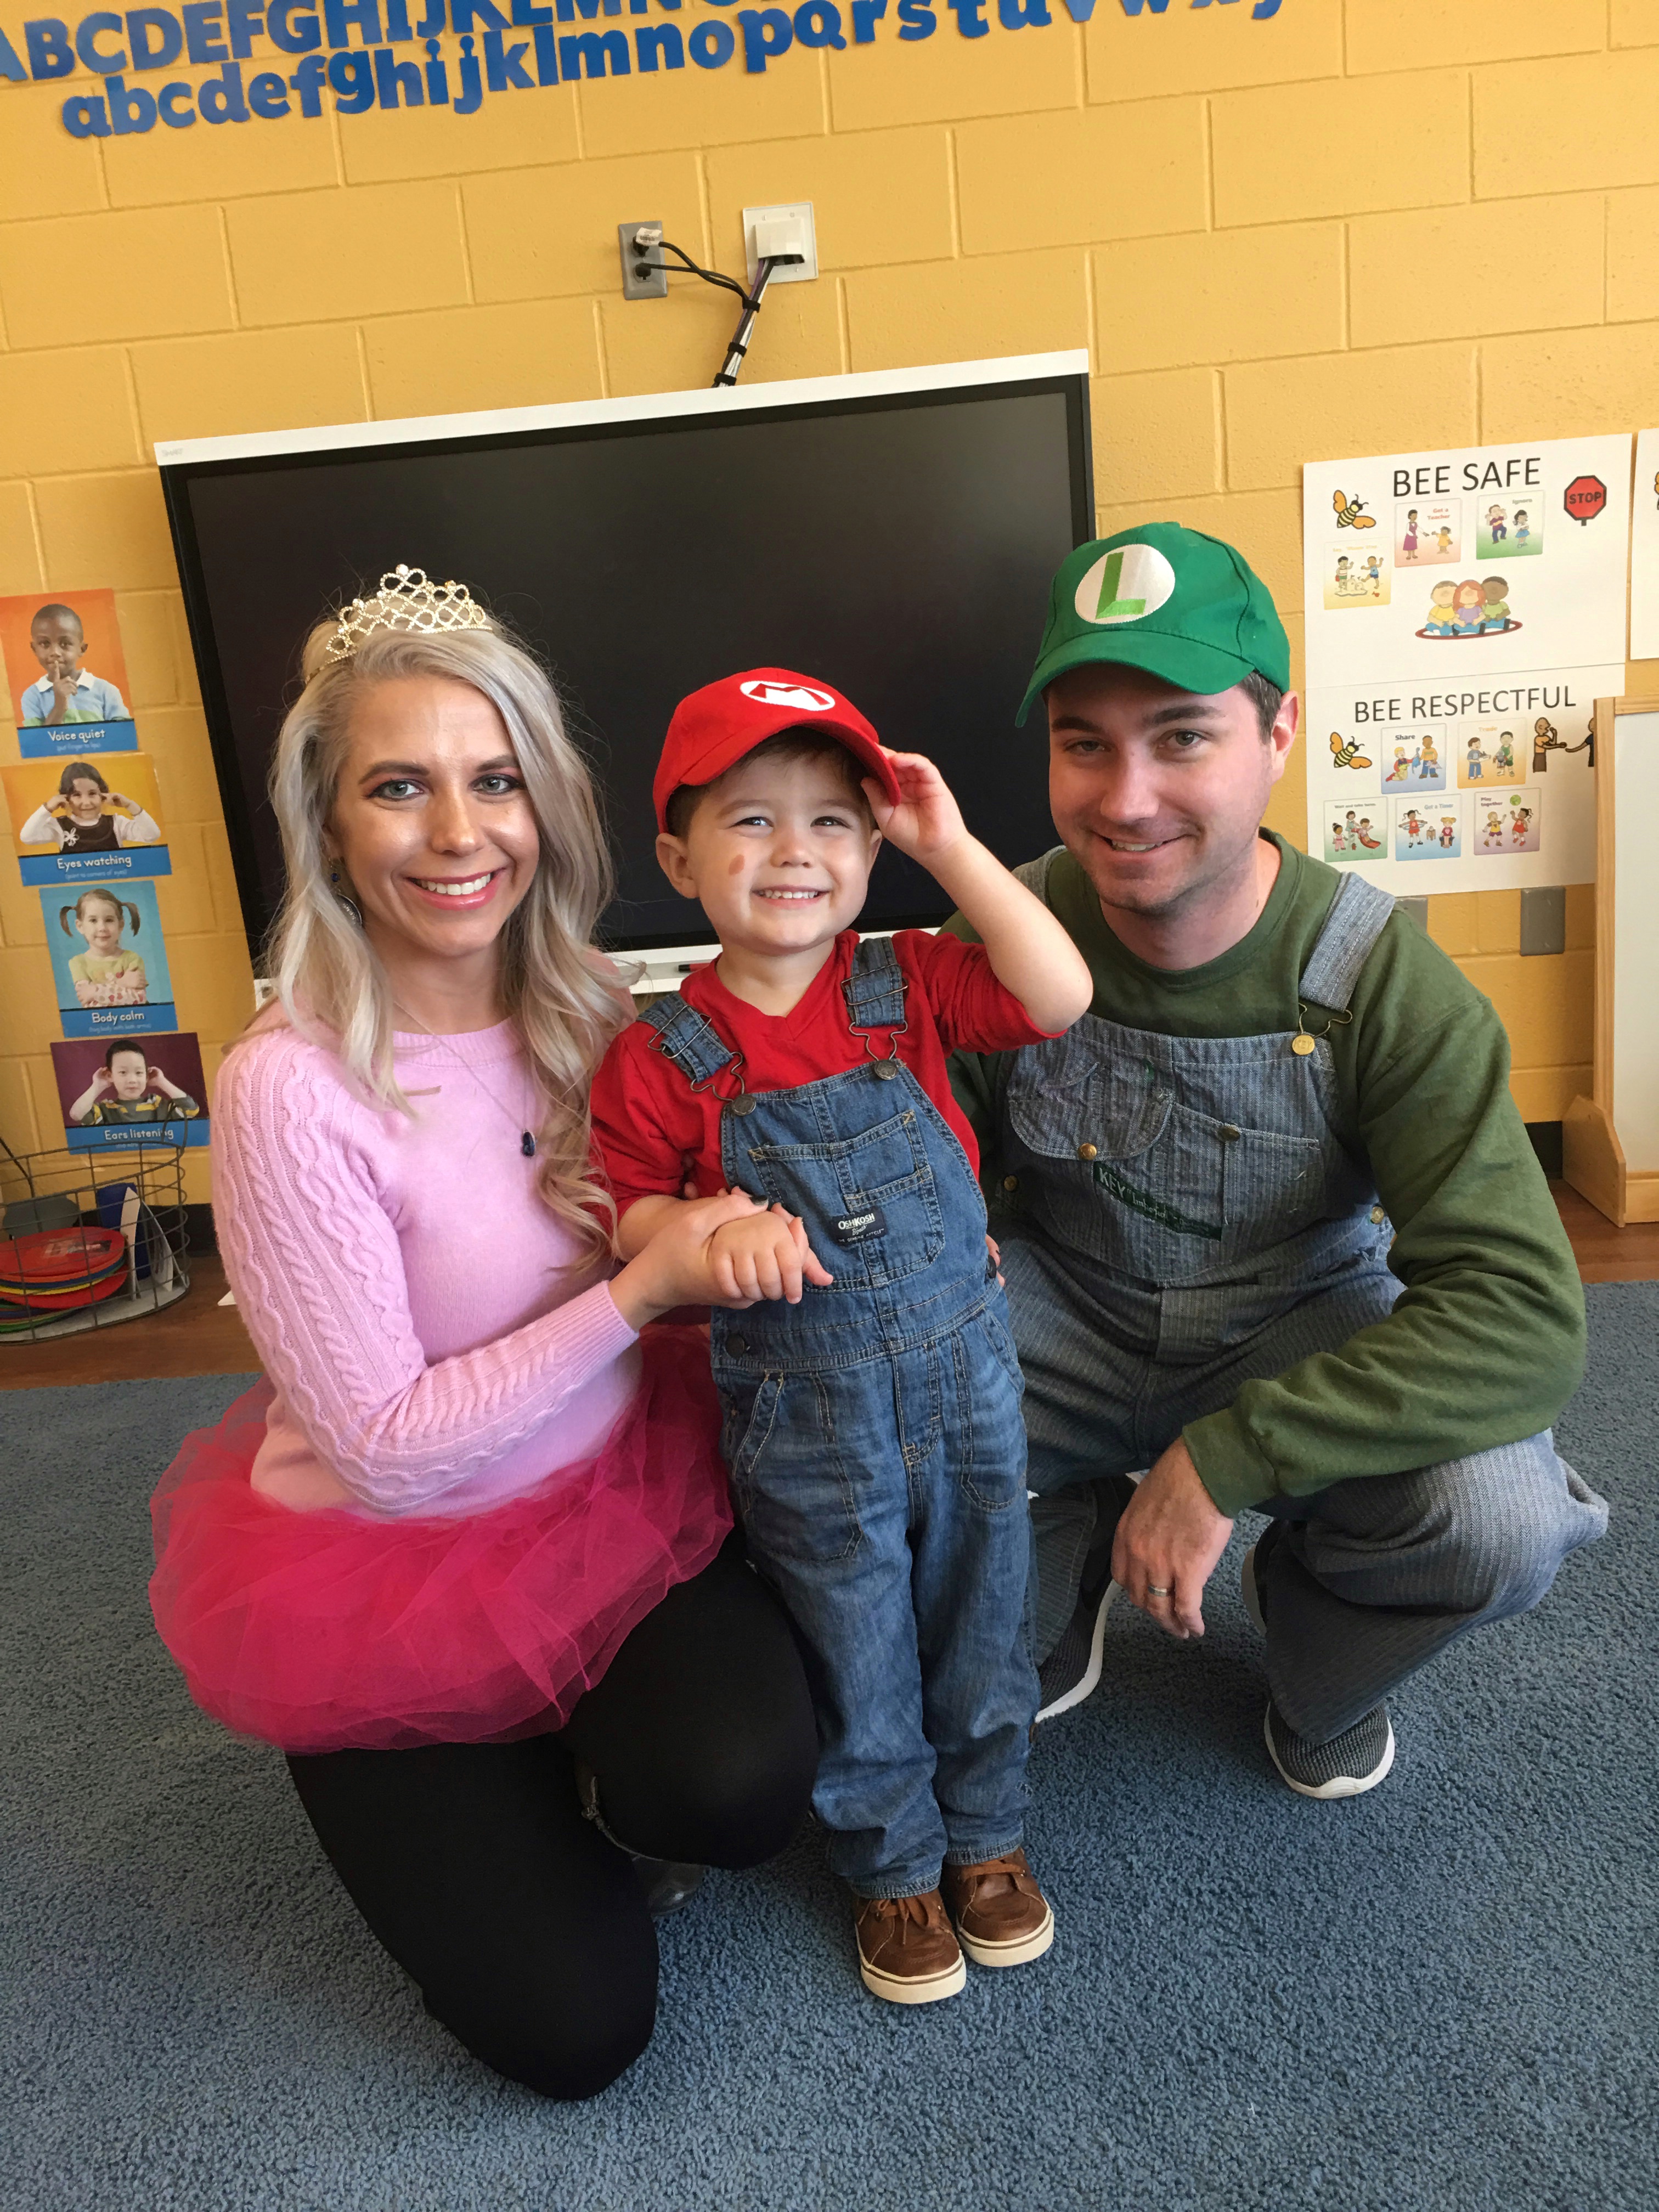 Super Mario Halloween Costumes Family - DIY Family Halloween Costume Ideas for the Super Mario-loving family! Mario Costume, Luigi Costume, Princess Peach Costume, and Princess Daisy Costume come together for a Super Mario Family Halloween Costume that will surely be a hit! #Halloween #FamilyCostumes #Mario